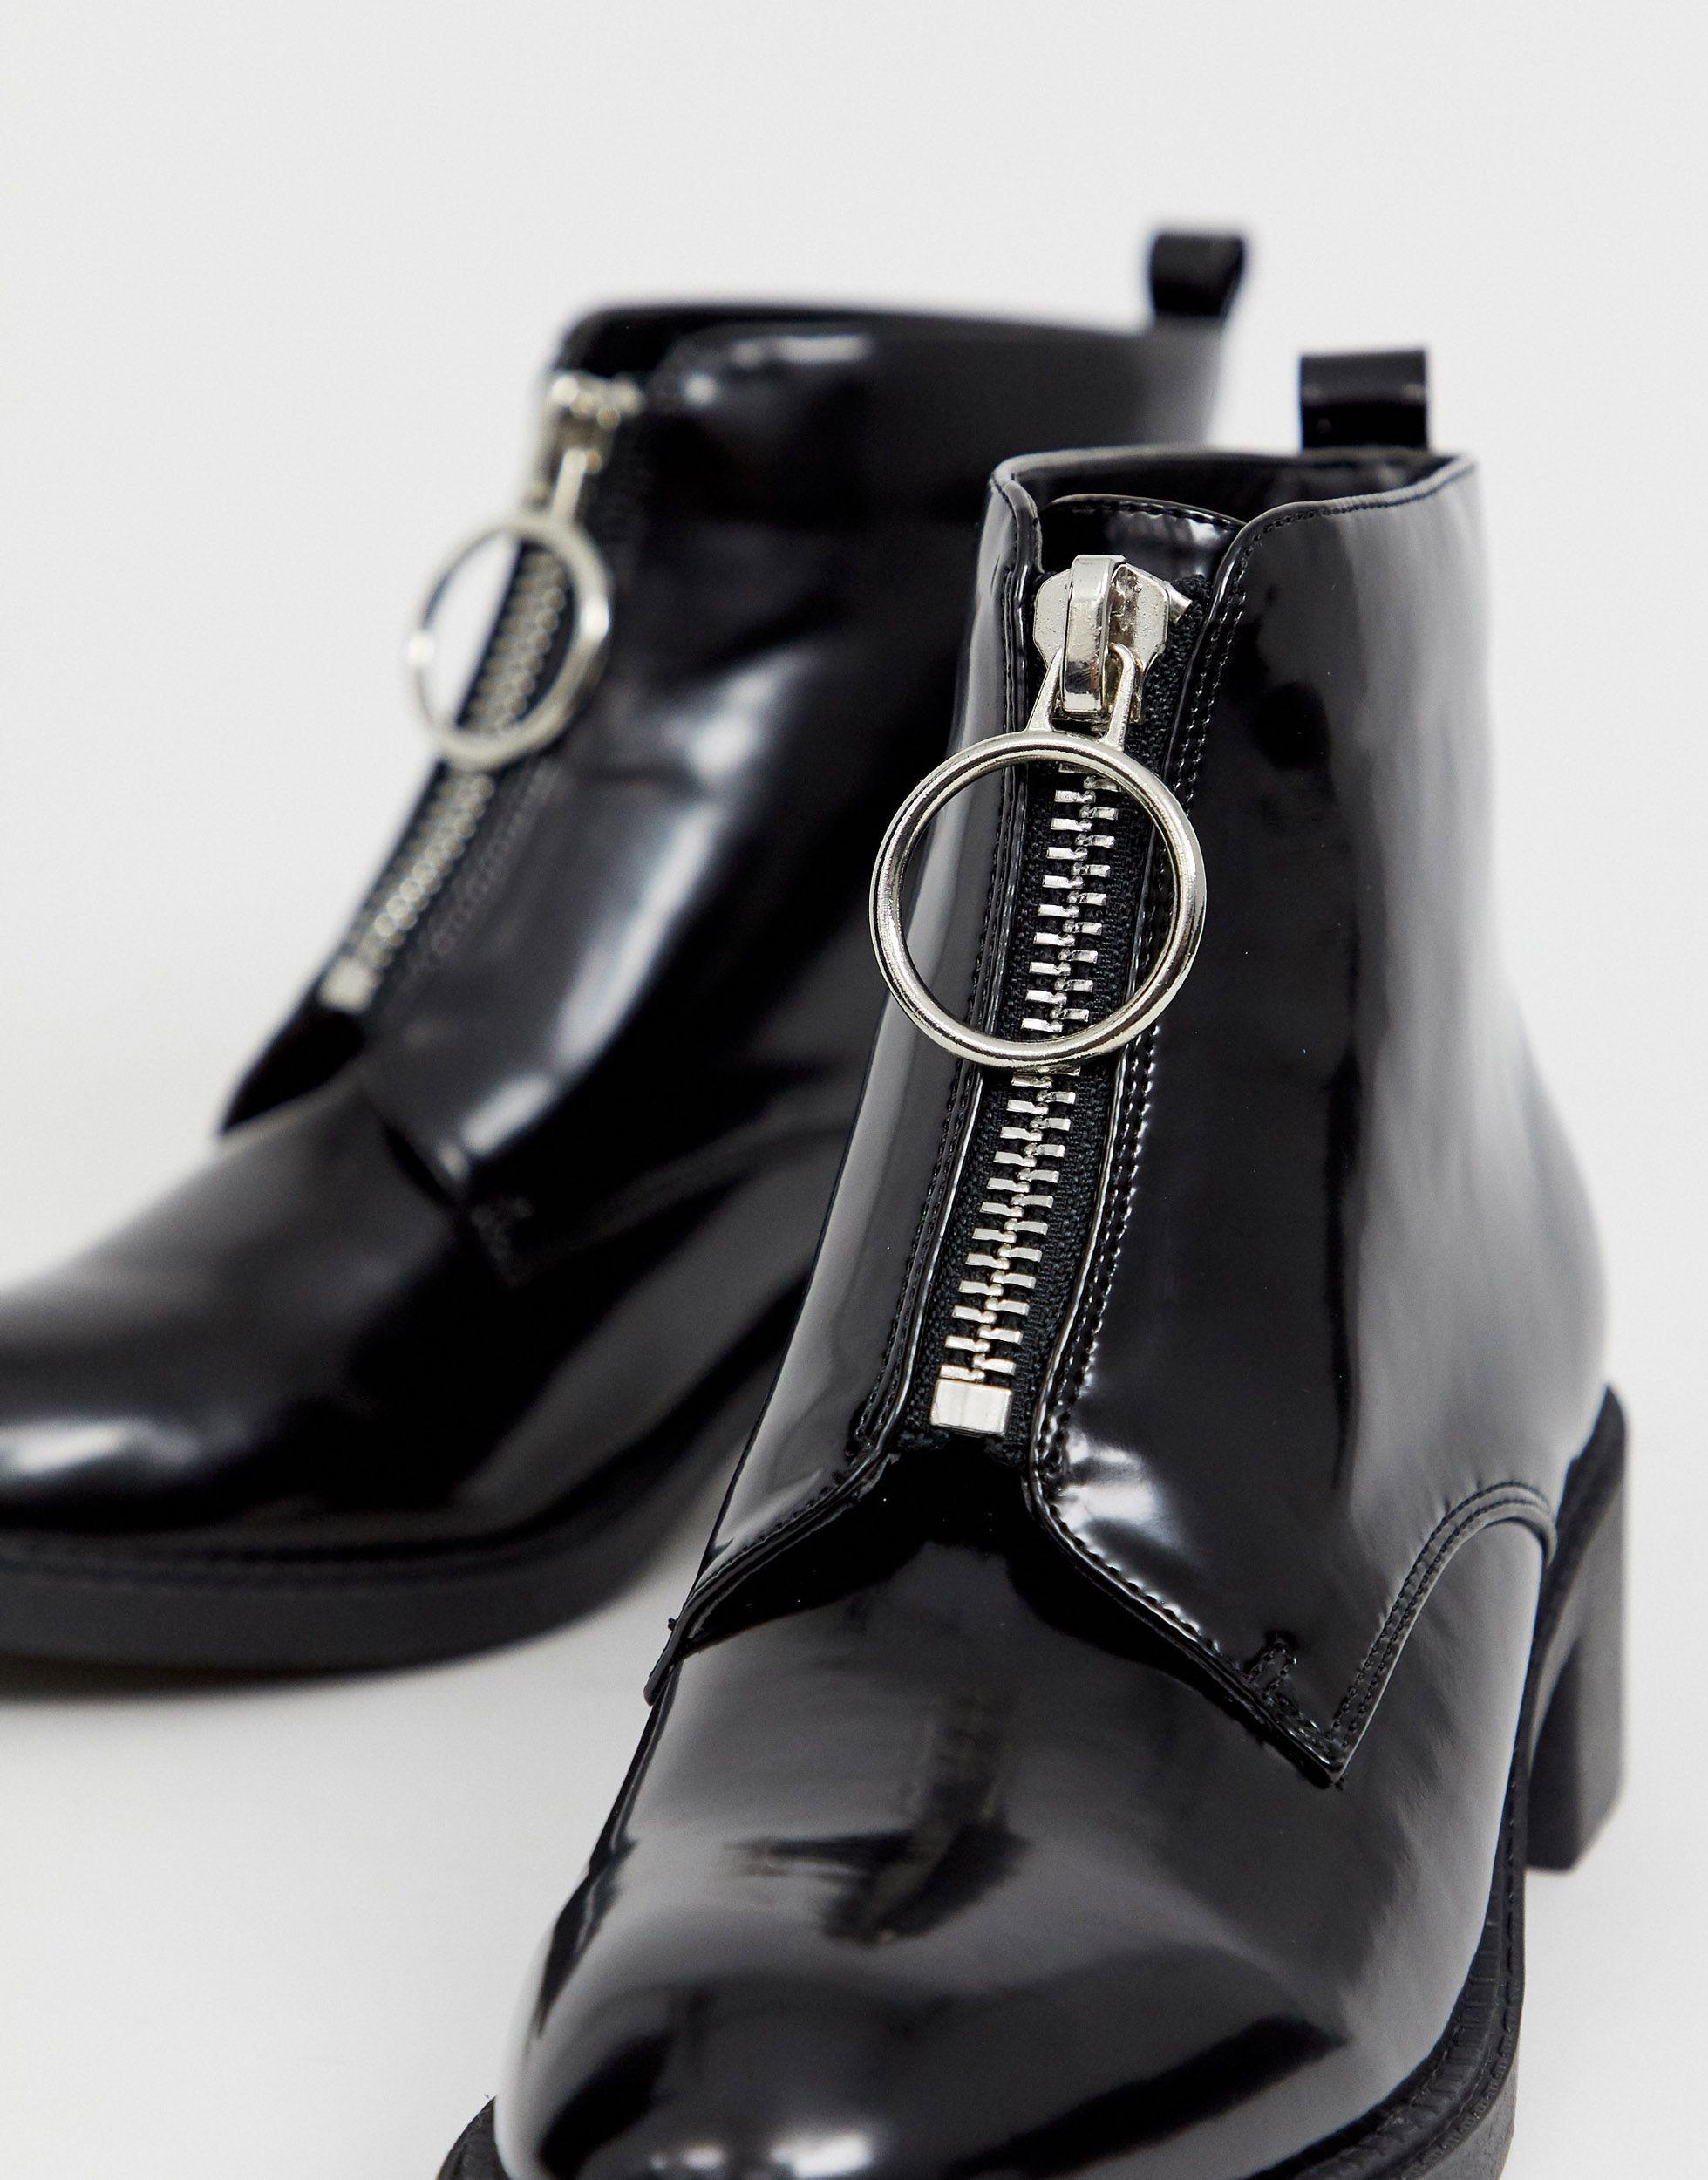 Glamorous Black Zip Front Ankle Boots | Lyst